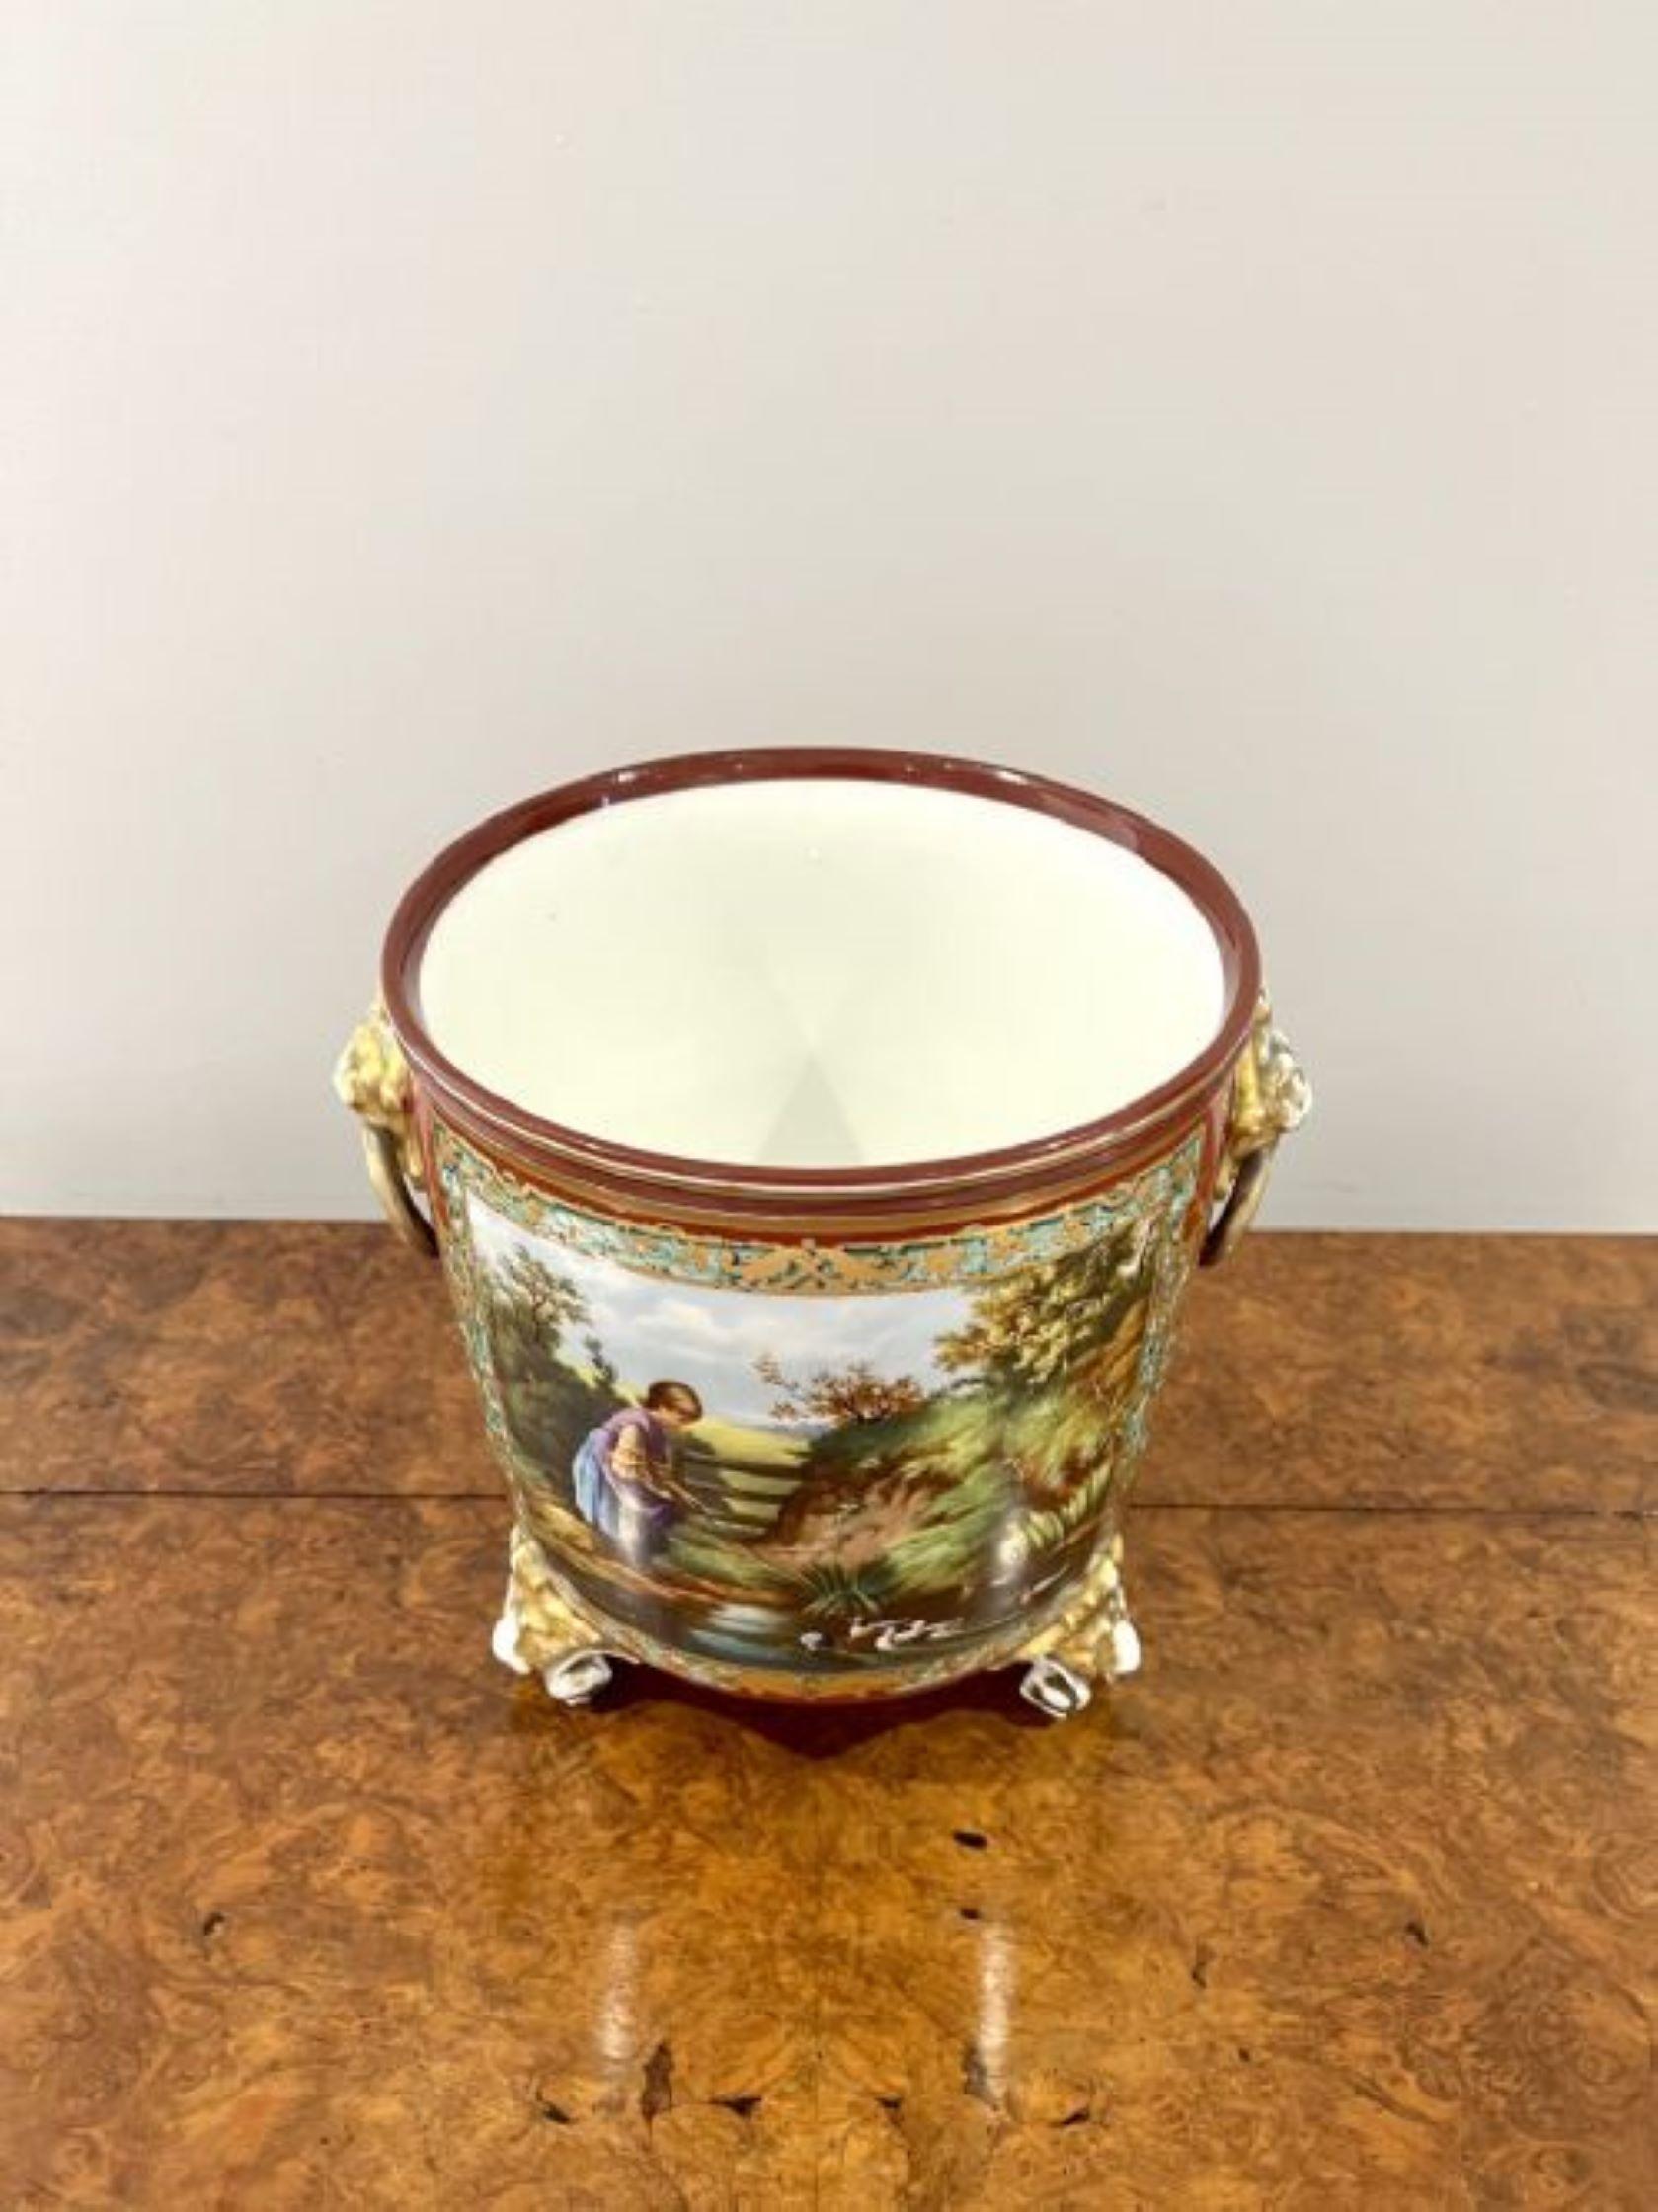 Superb quality French antique Victorian hand painted porcelain jardiniere having a superb quality French antique Victorian hand painted porcelain jardiniere to the front a landscape portrait of a river, a young lady, ducks, trees and a gate in